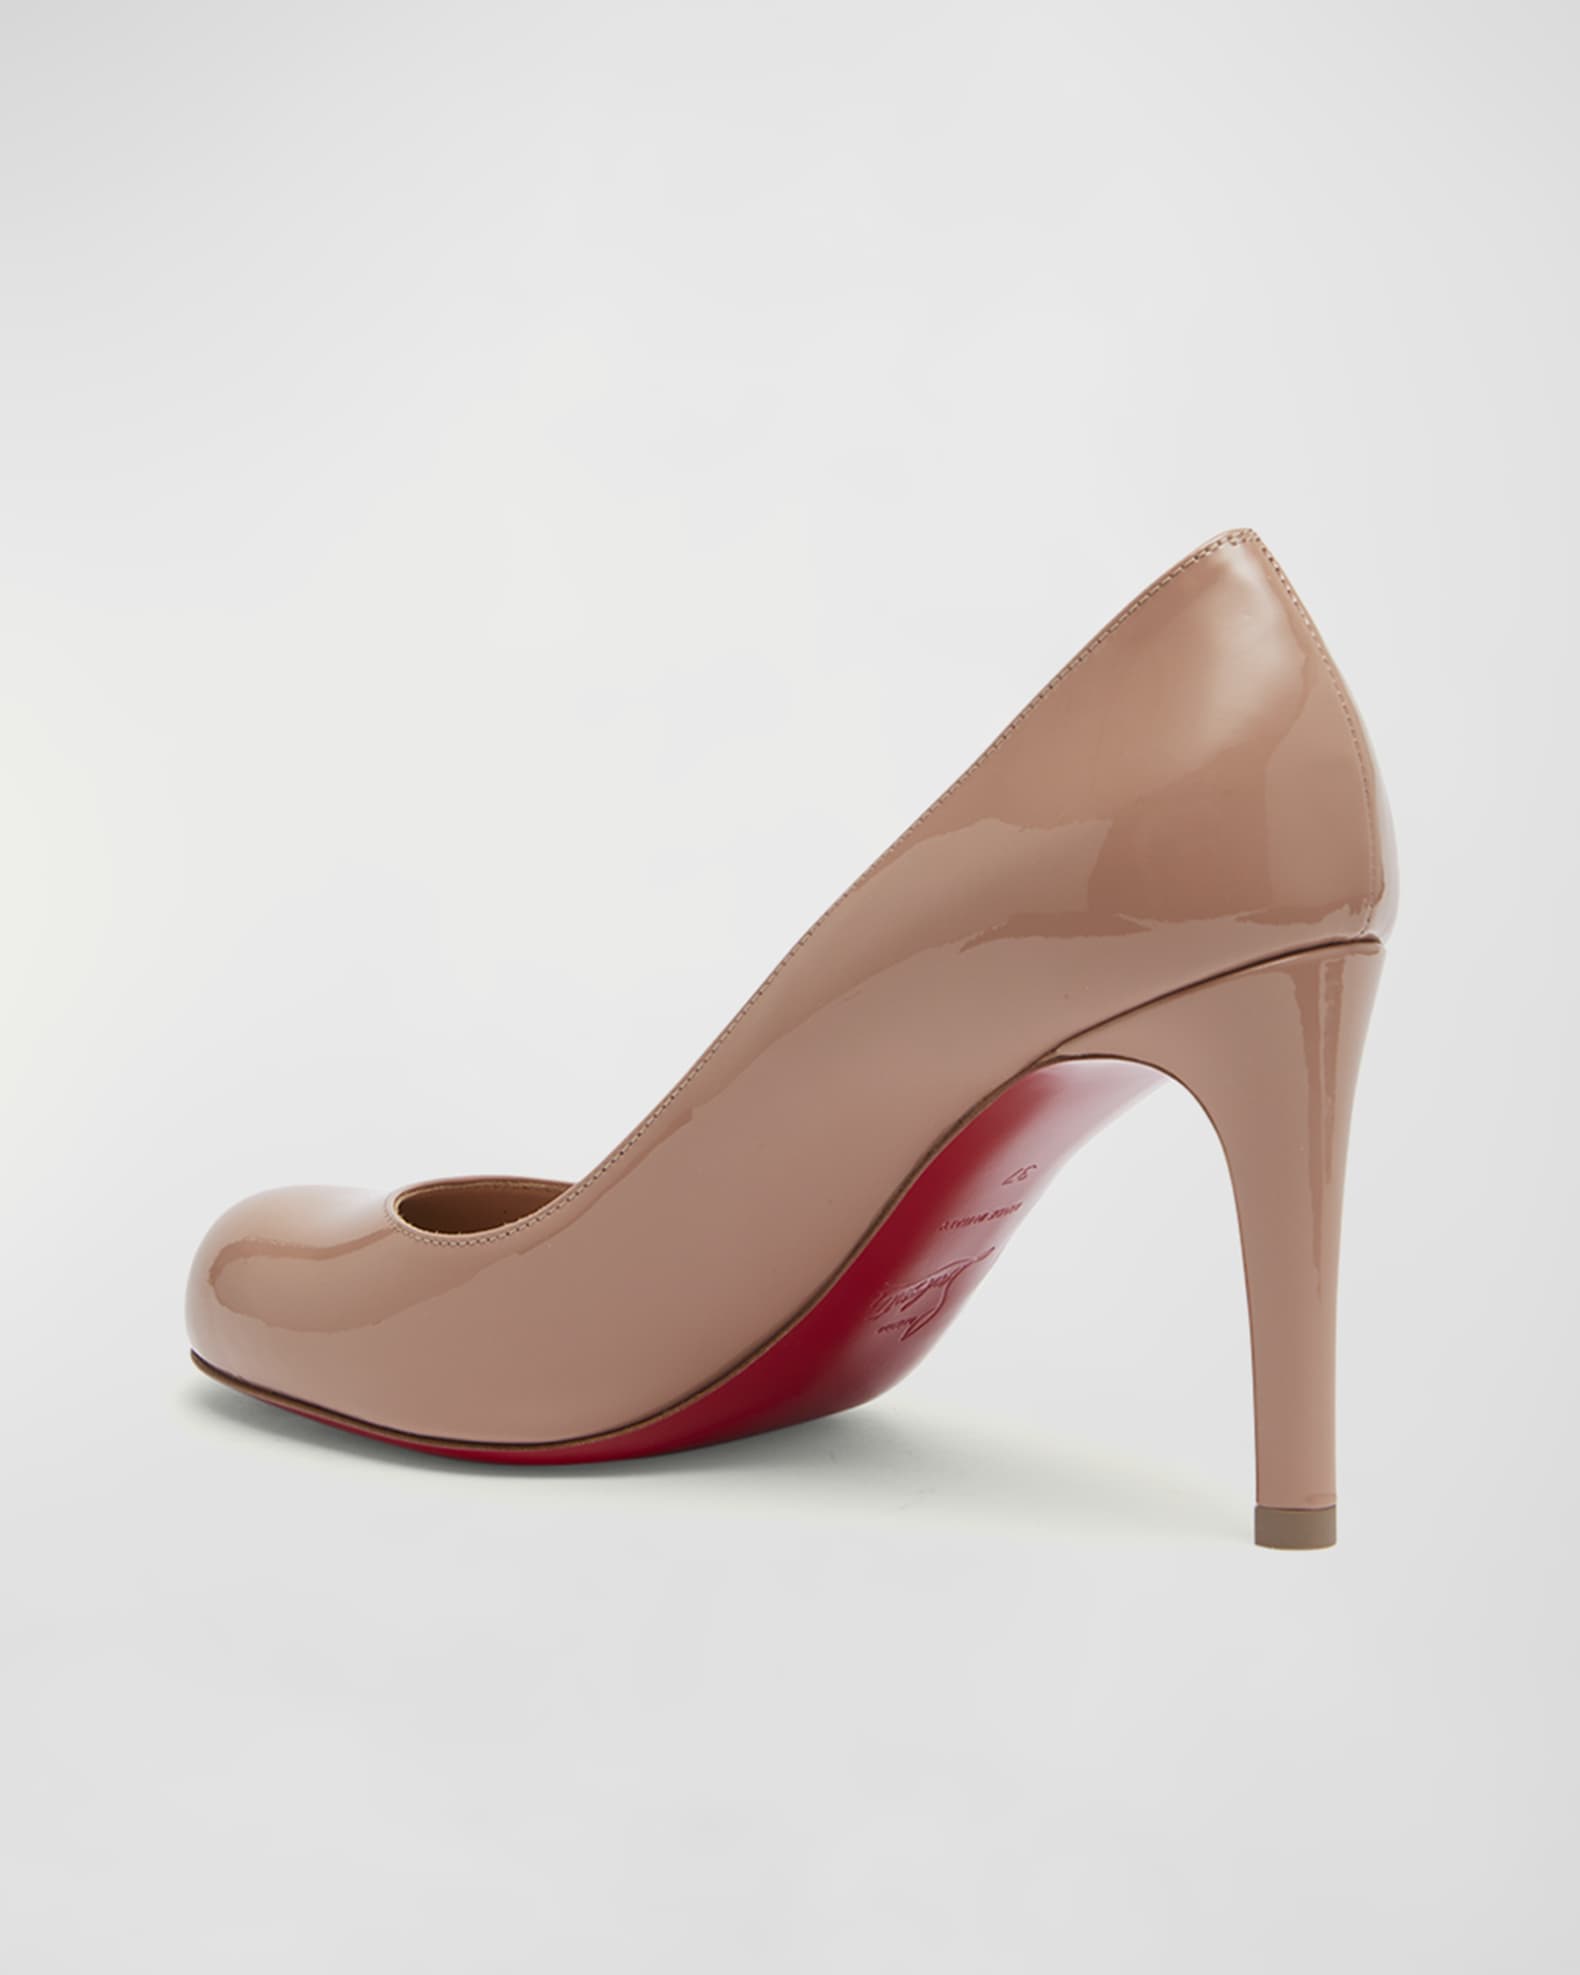 Christian Louboutin Pumppie Patent Red Sole Pumps | Neiman Marcus